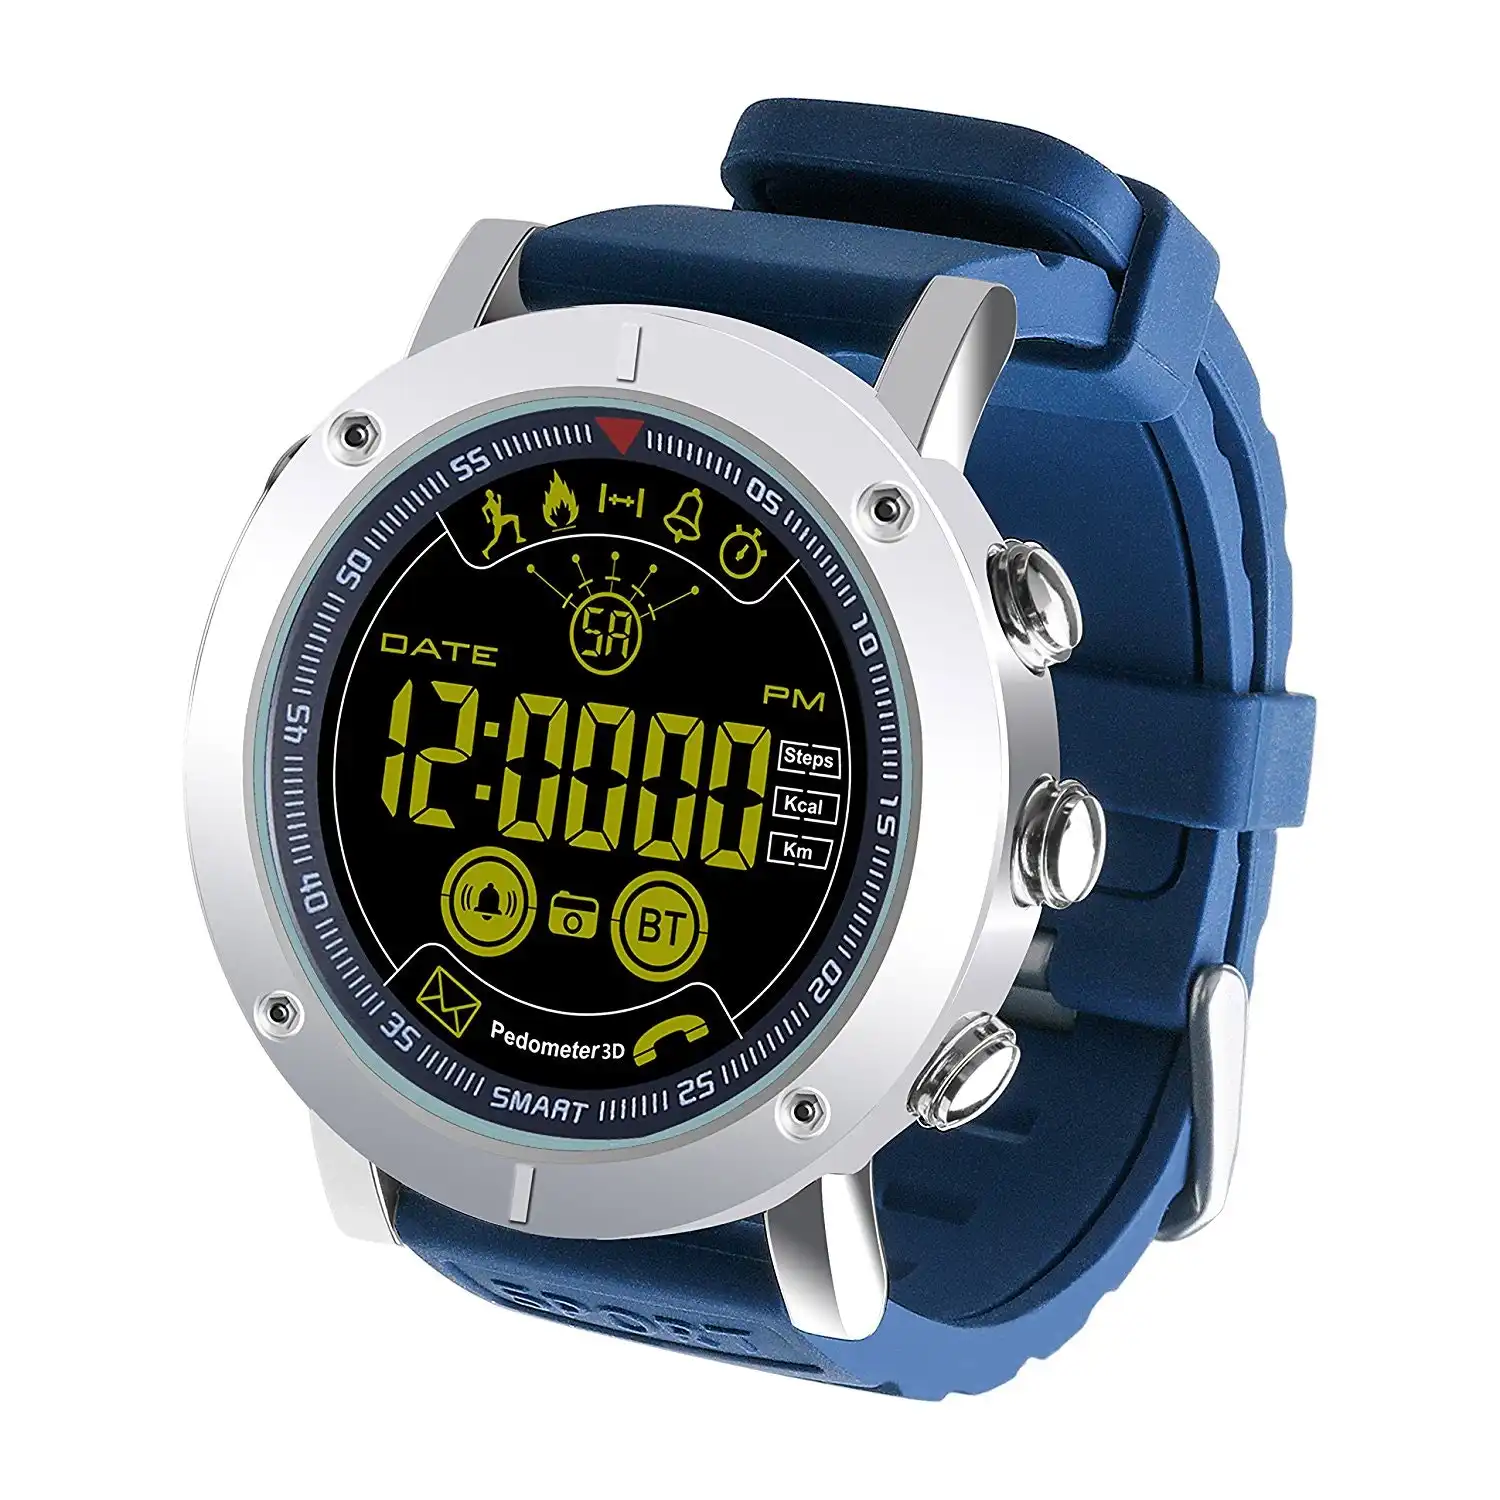 Bluetooth V4.0 Smart Watch 1.8" Fstn Lcd Sports Tracker Ip67 Android Ios - Blue